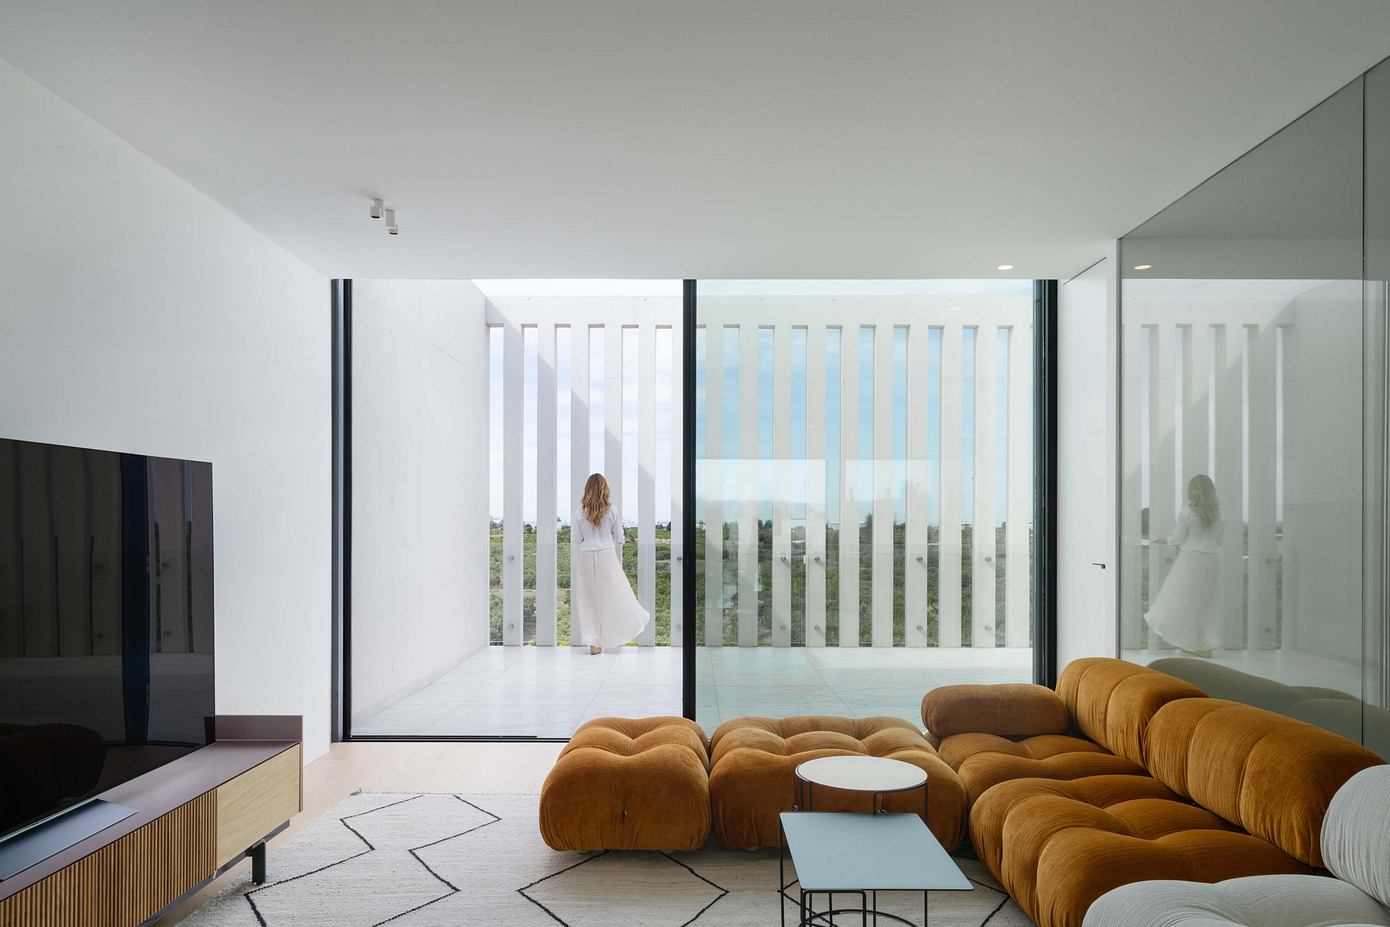 Vertical House: A Contemporary Architectural Marvel in Spain